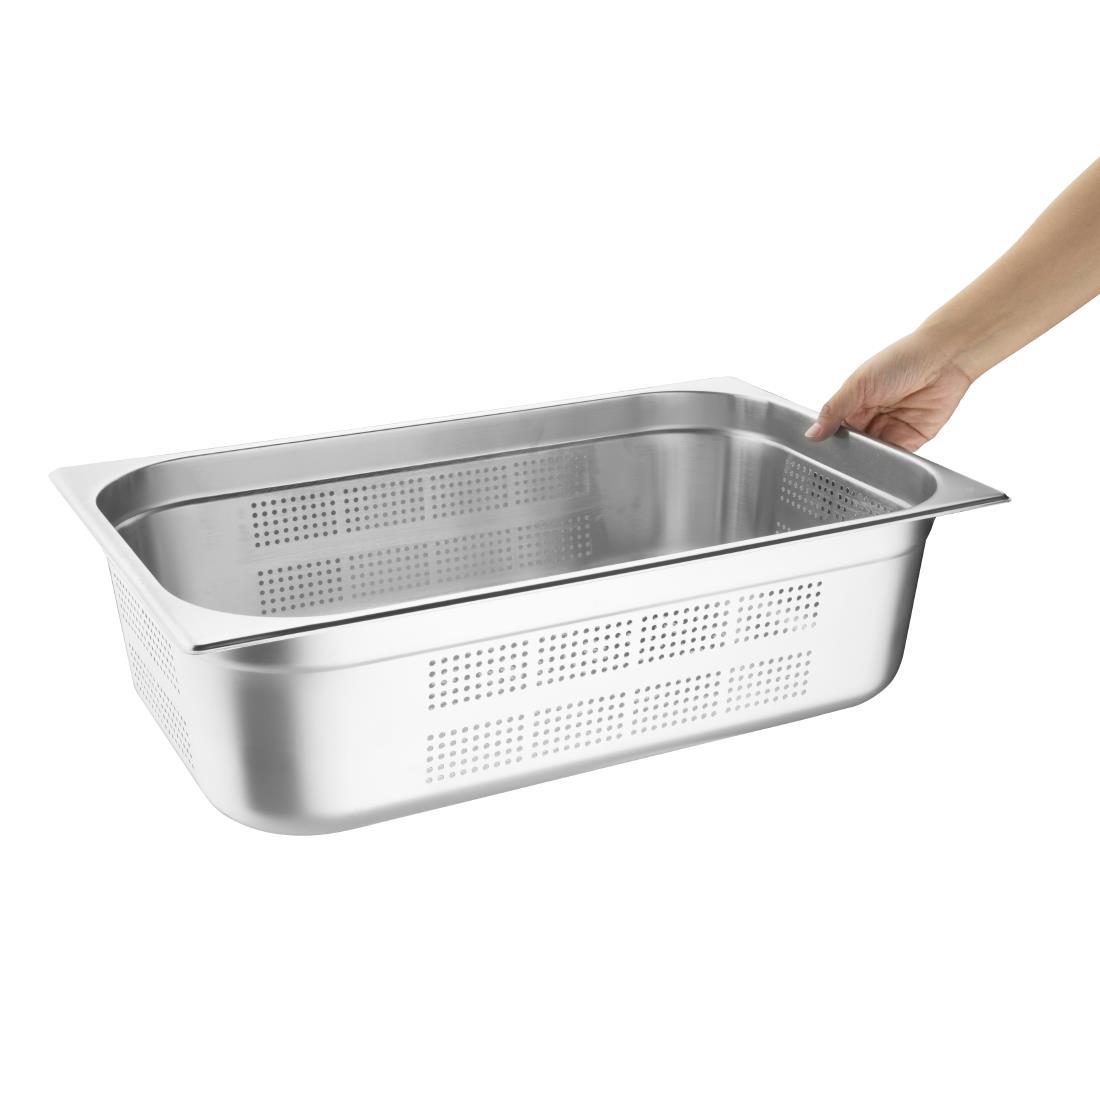 Vogue Stainless Steel Perforated 1/1 Gastronorm Pan 150mm - K842  - 2